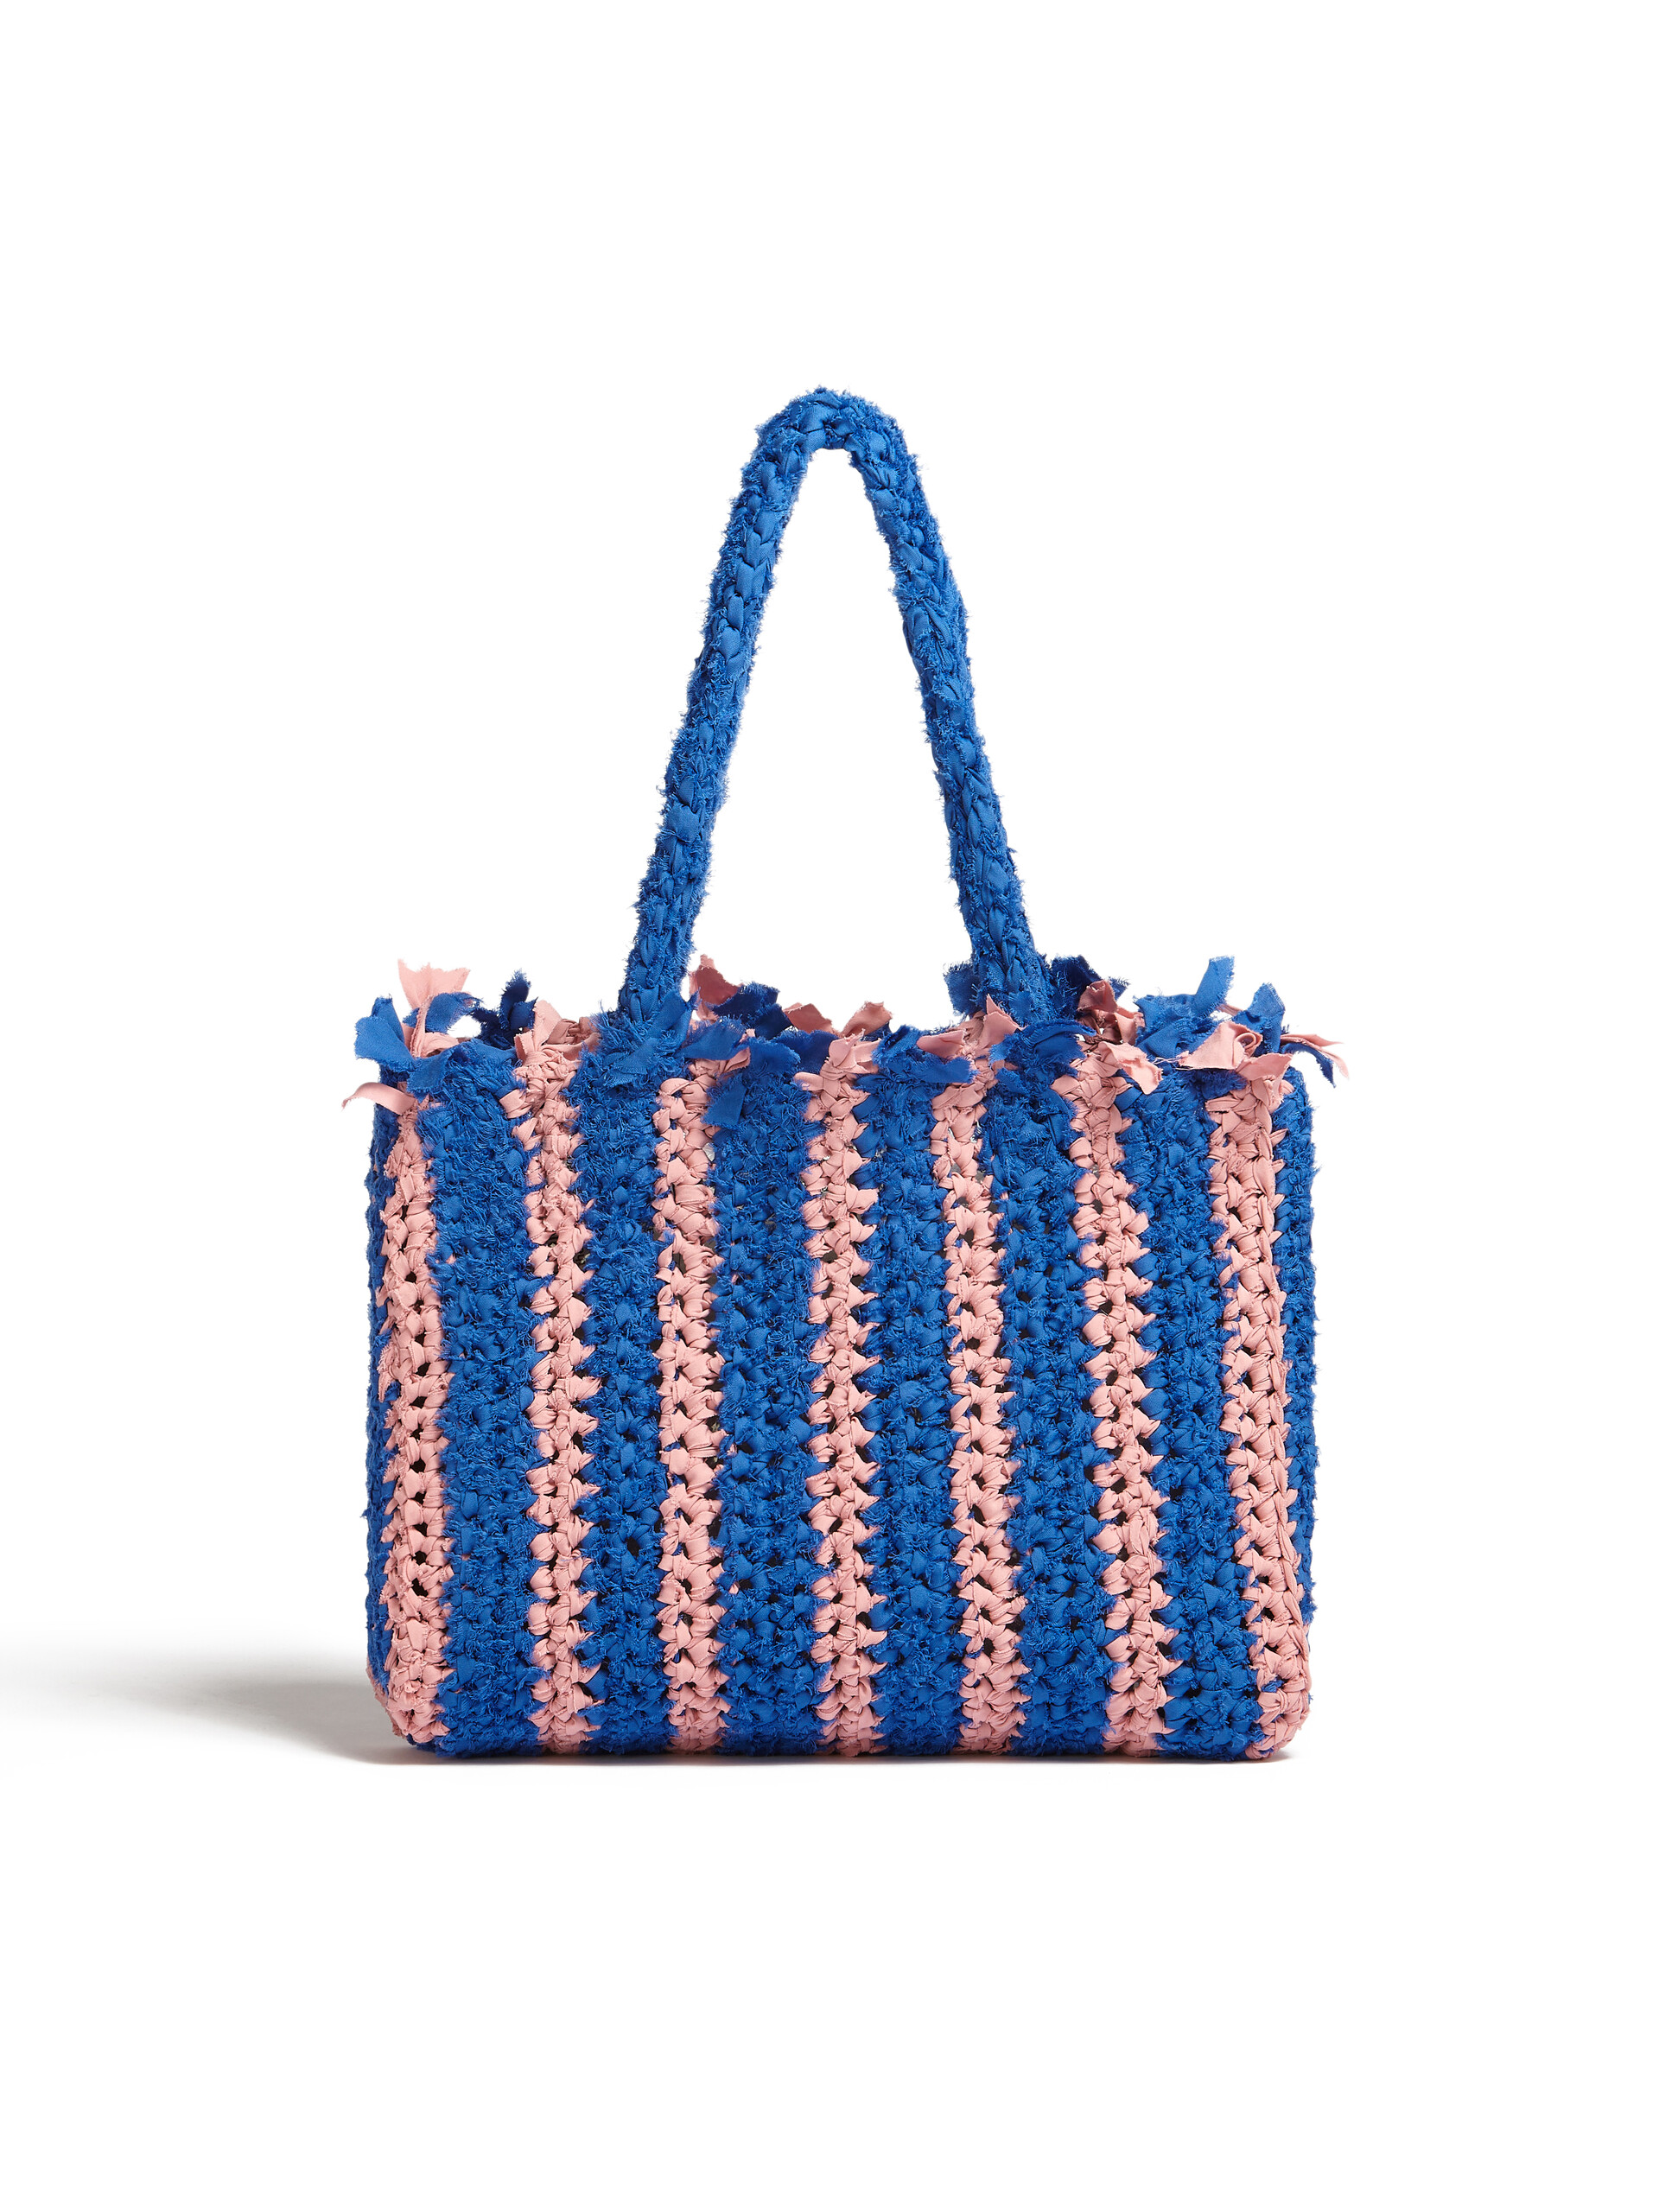 MARNI MARKET JERSEY bag in pink and blue cotton - Bags - Image 3